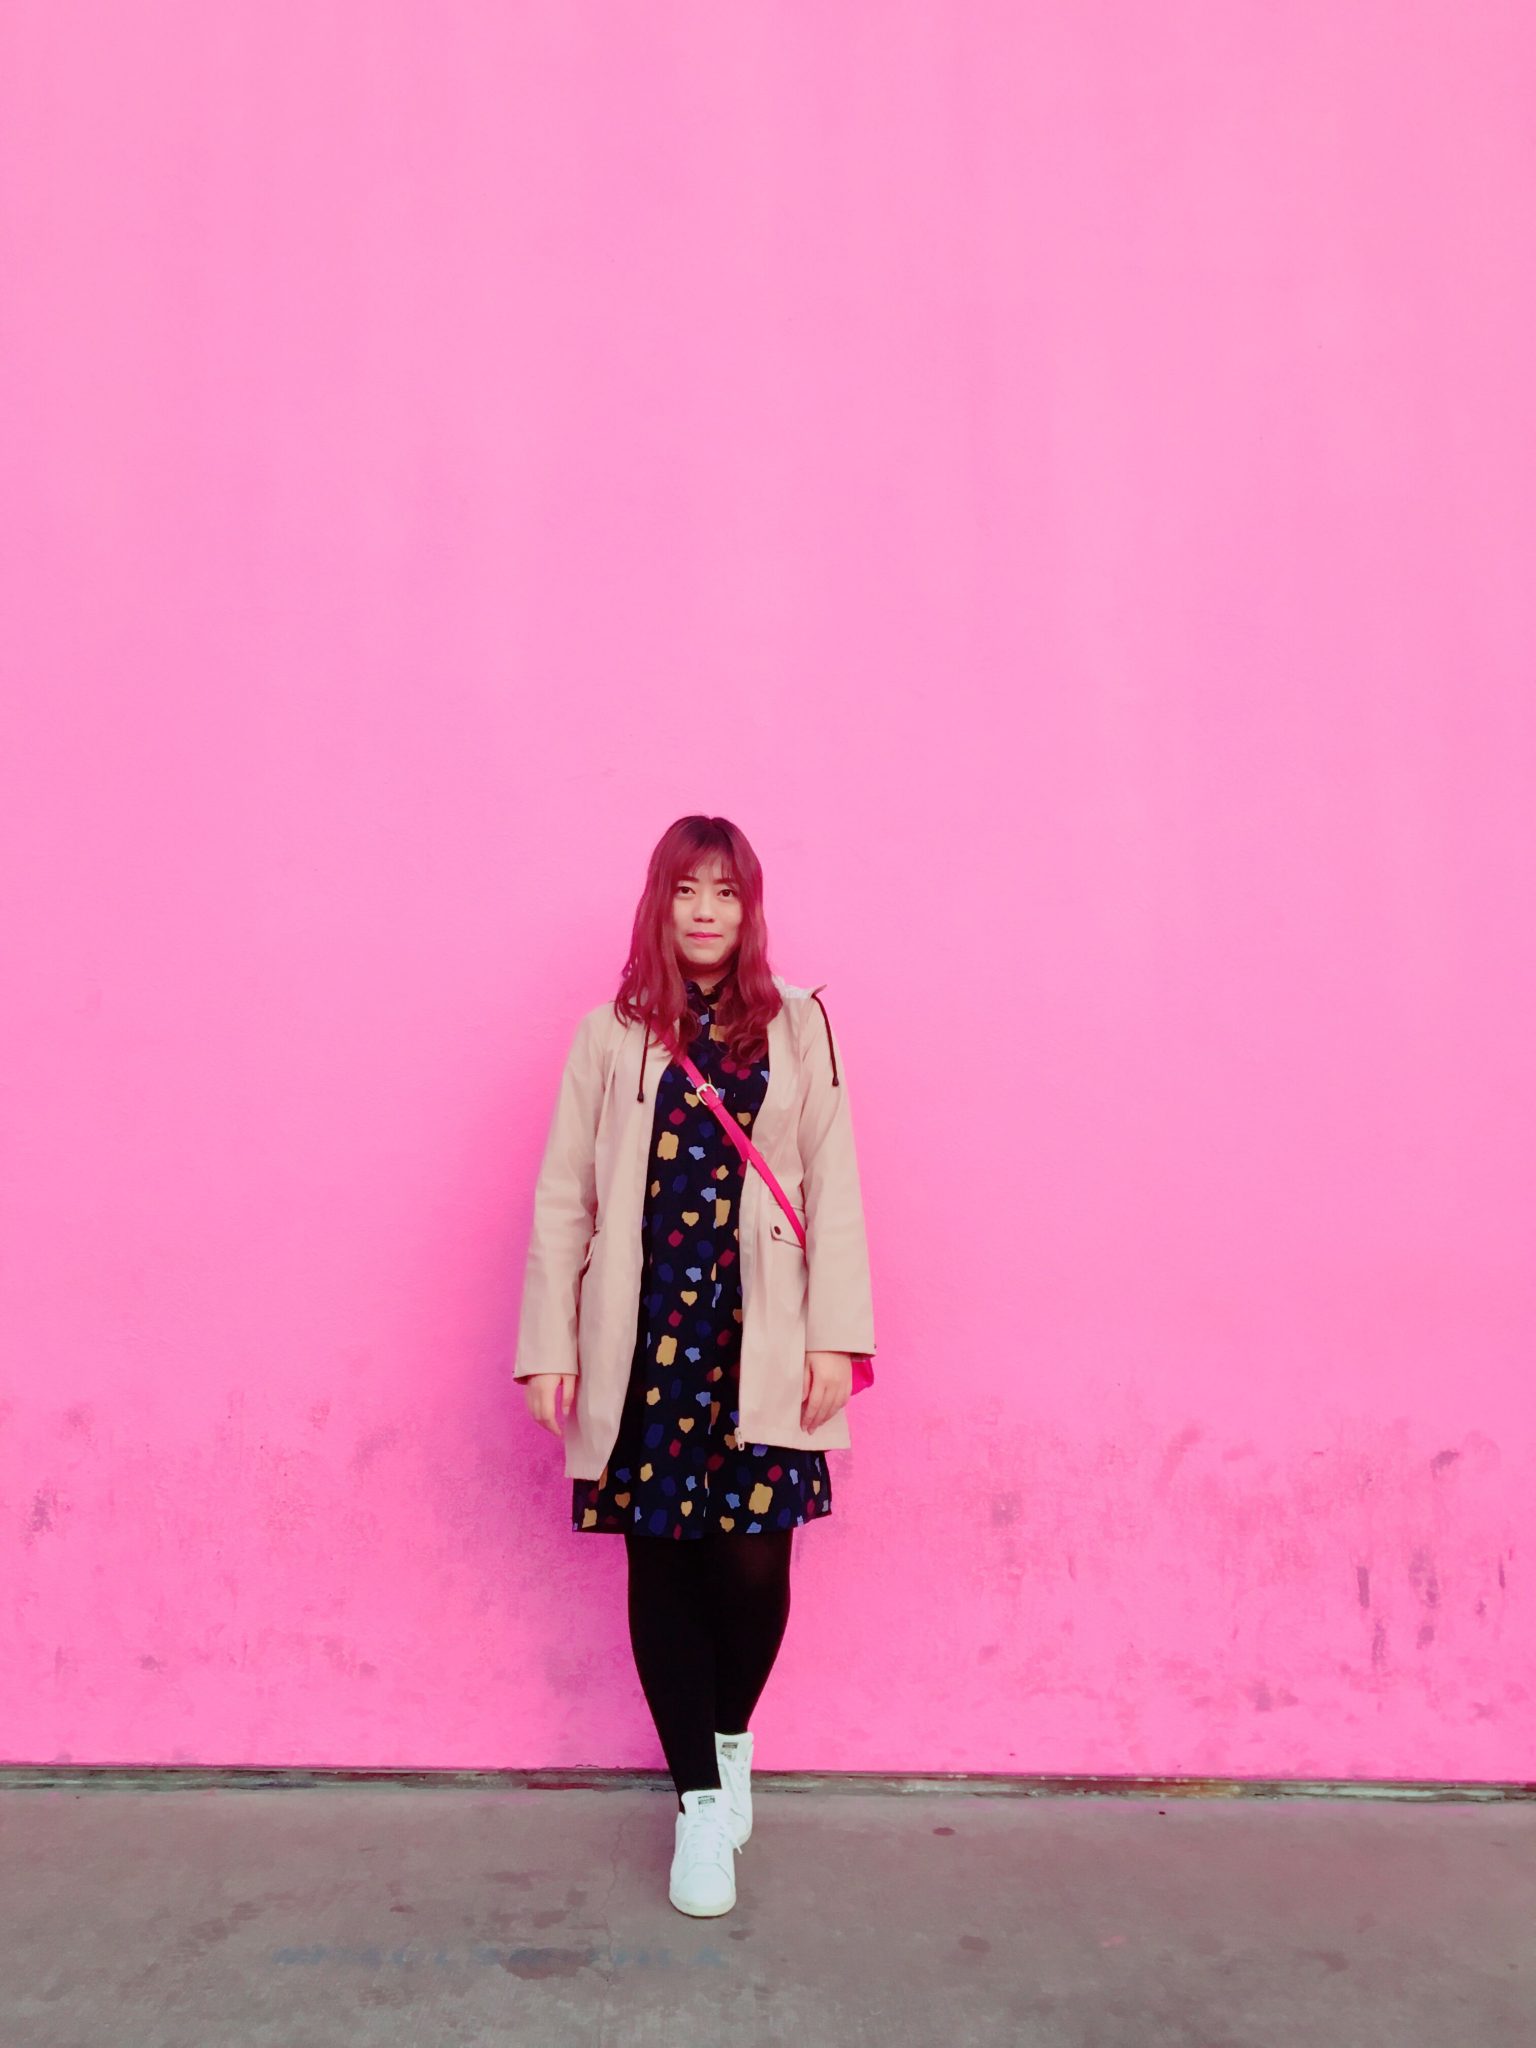 Chinese girl standing up against a pink wall